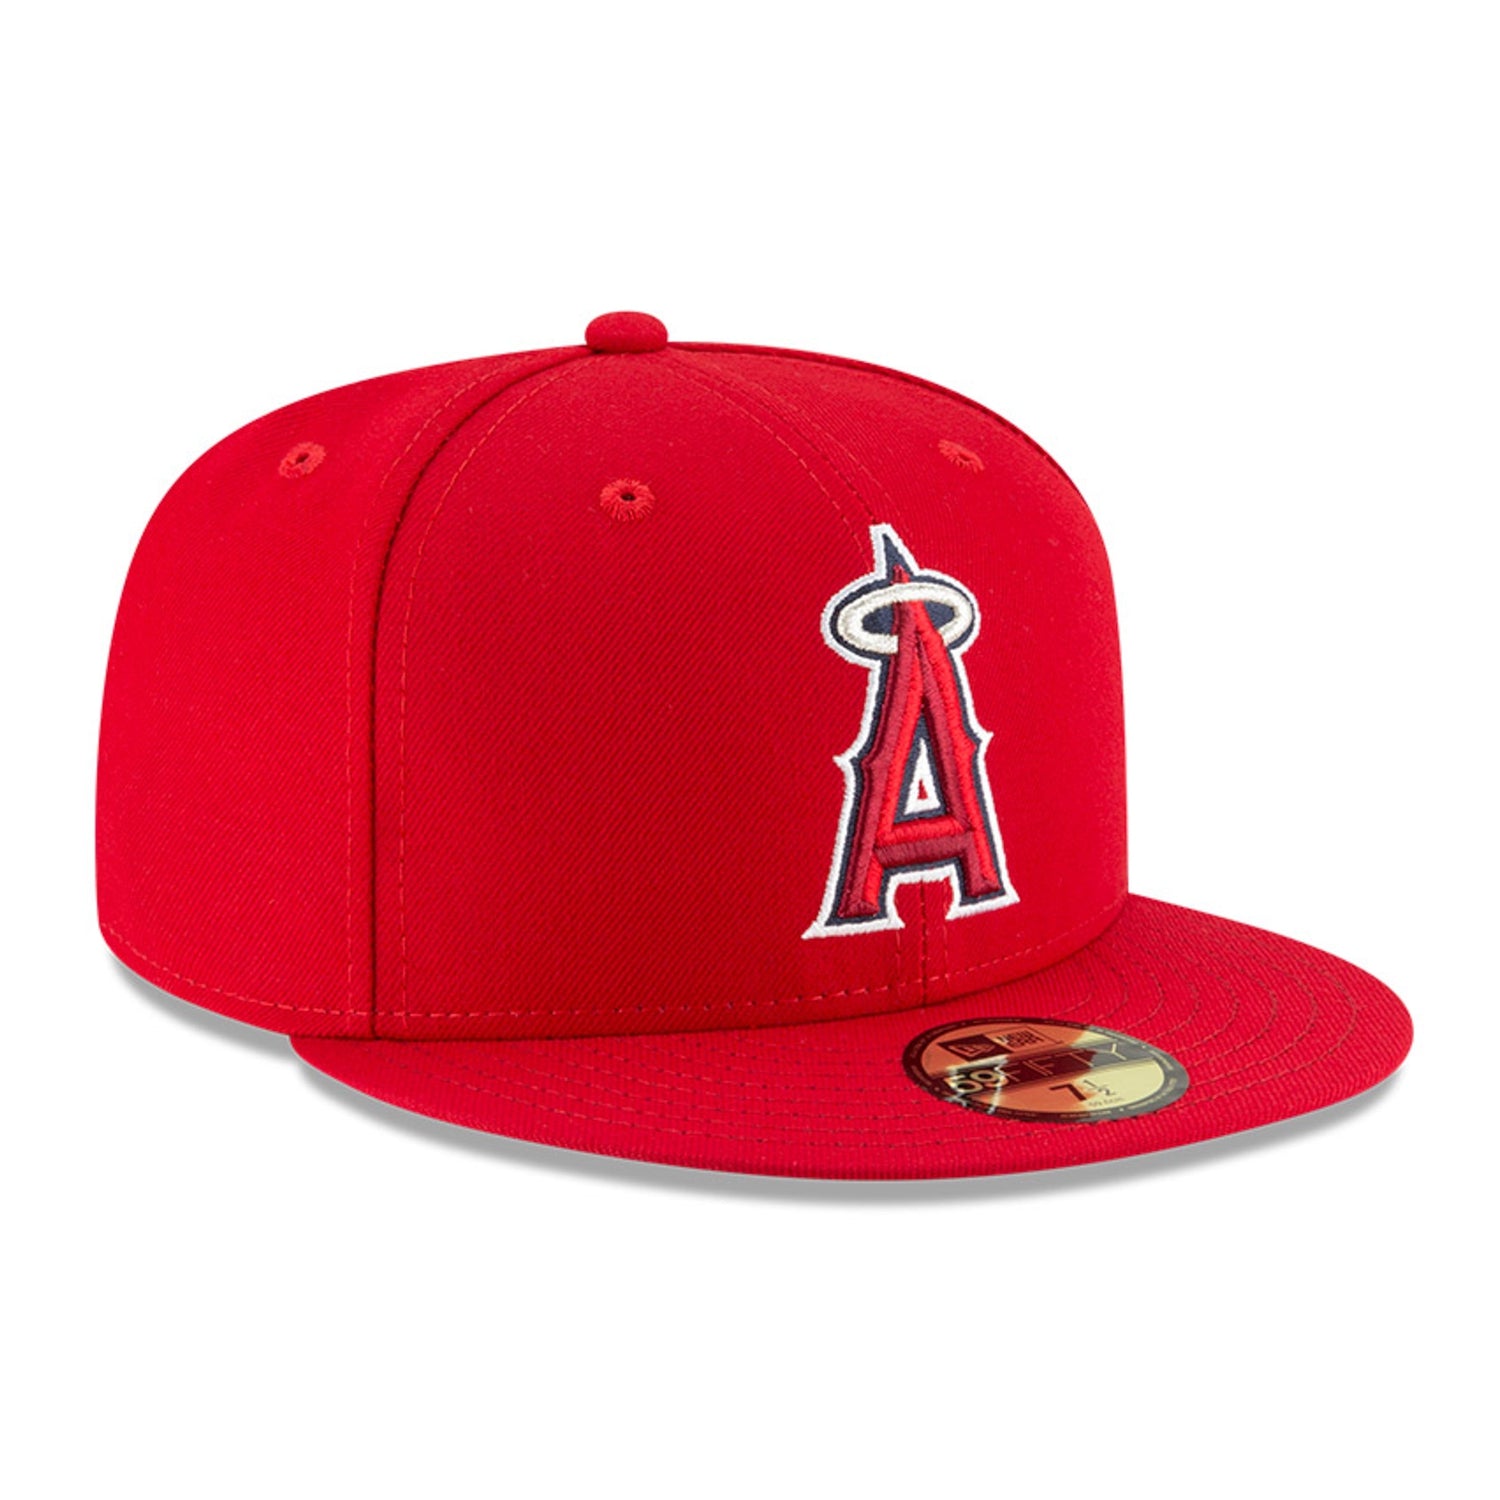 New Era 59Fifty Authentic Collection Los Angeles Angels Game Hat - Red ...